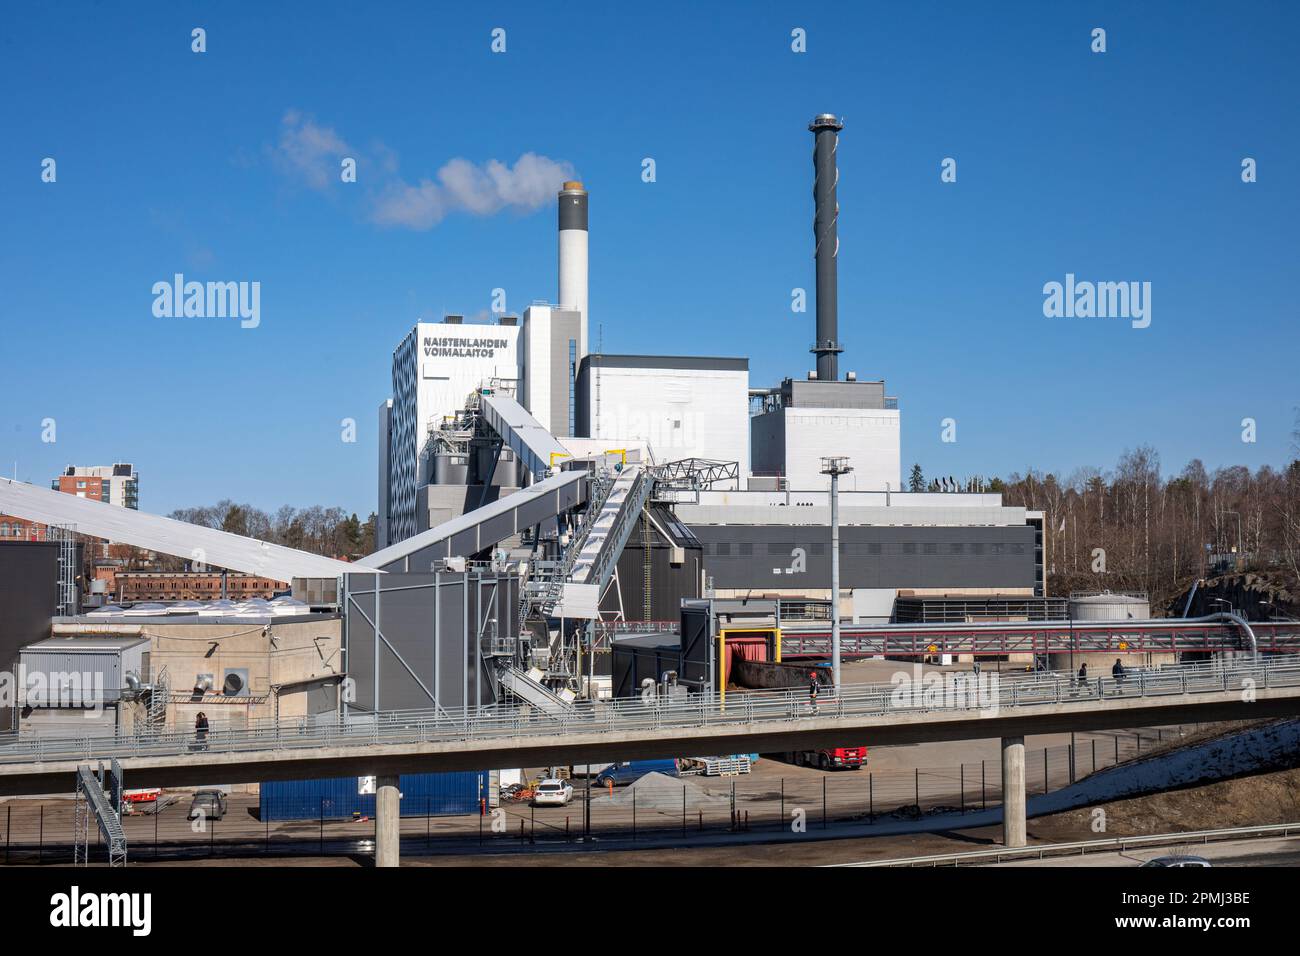 Naistenlahden voimalaitos or Naistenlahti Power Plant against clear blue sky on a sunny spring day in Tampere, Finland Stock Photo